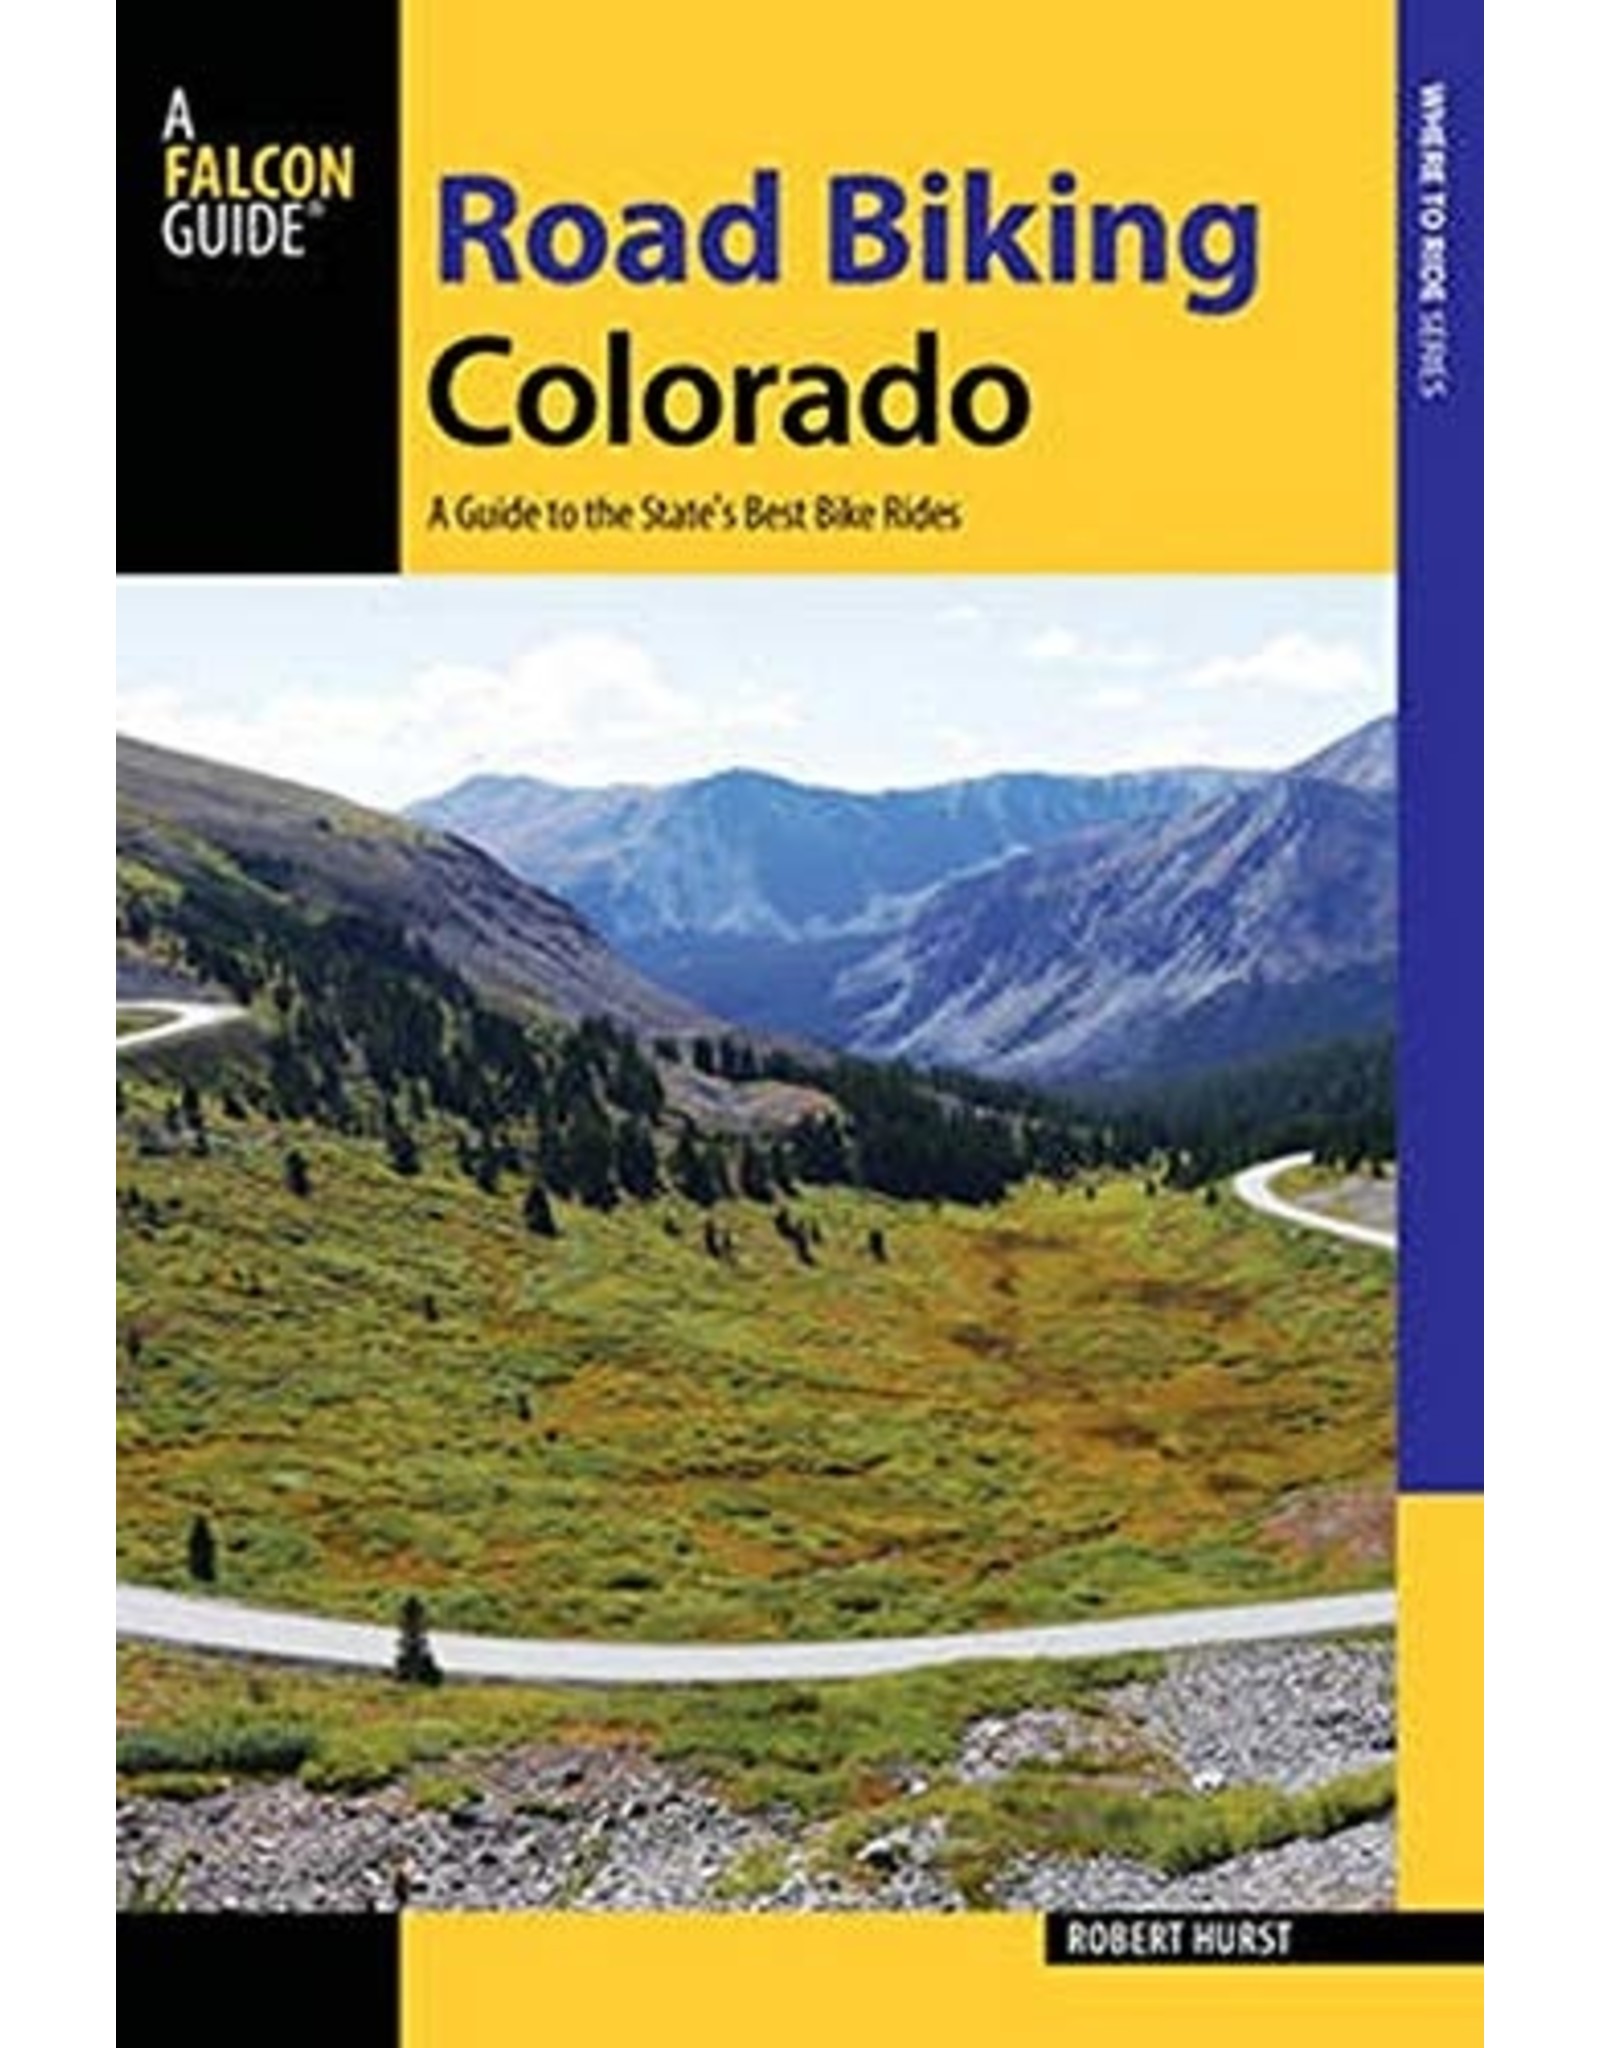 Road Biking Colorado: A Guide to the State's Best Bike Rides (Road Biking Series) Paperback – Illustrated